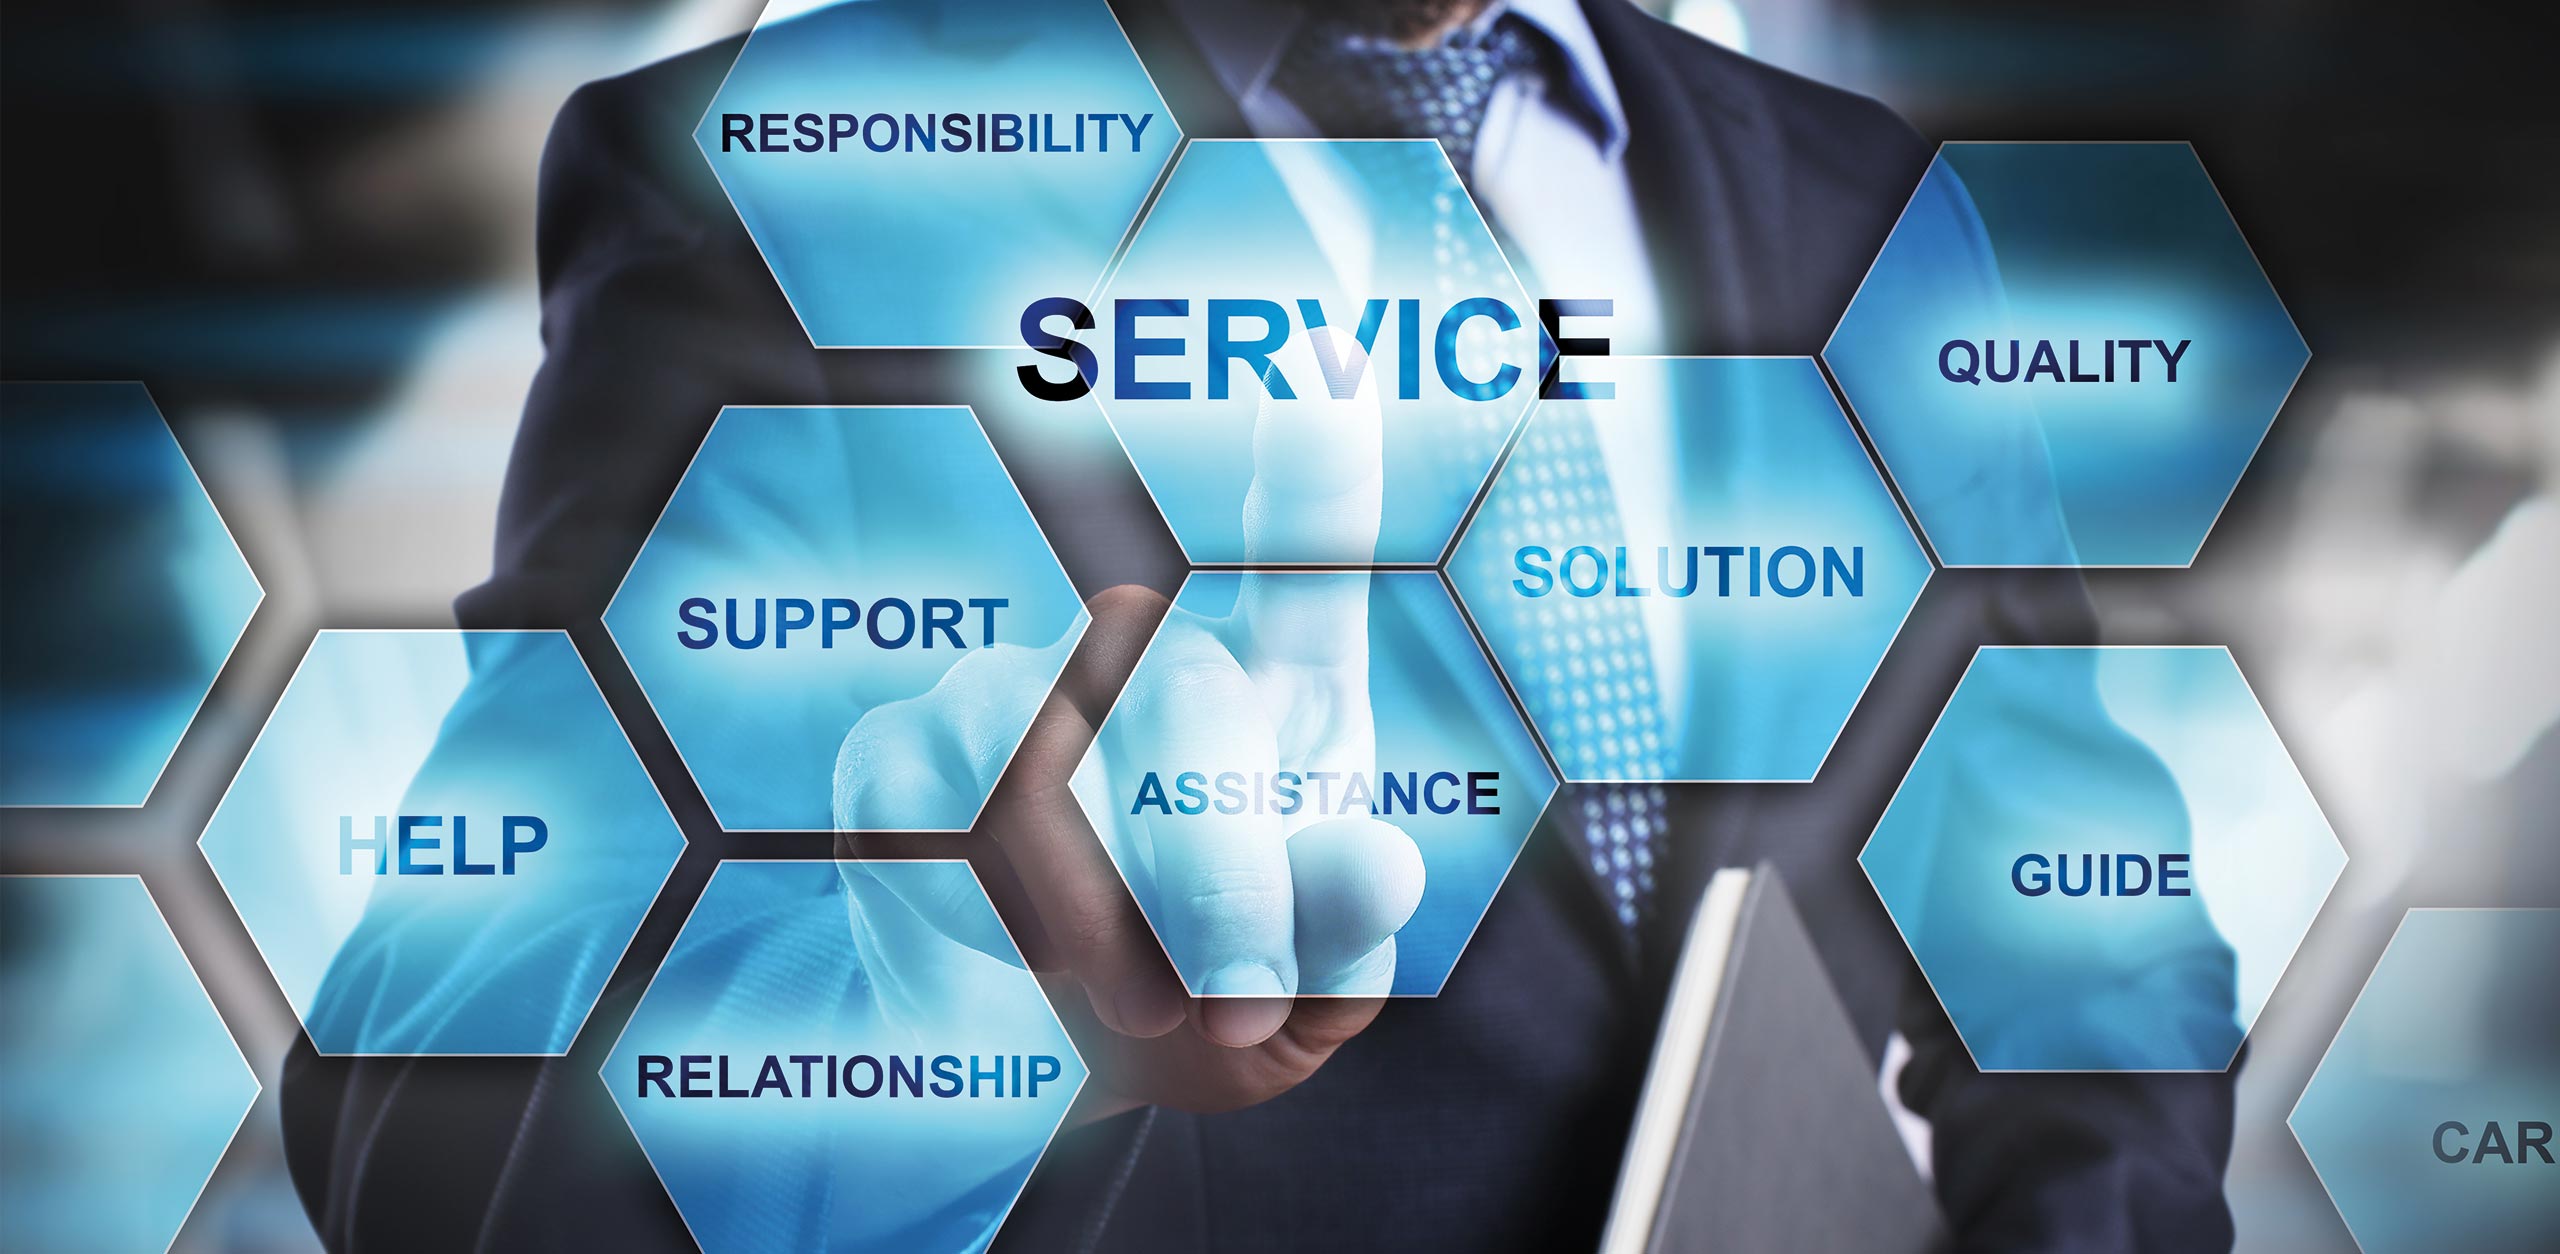 Top Benefits of Managed IT Services